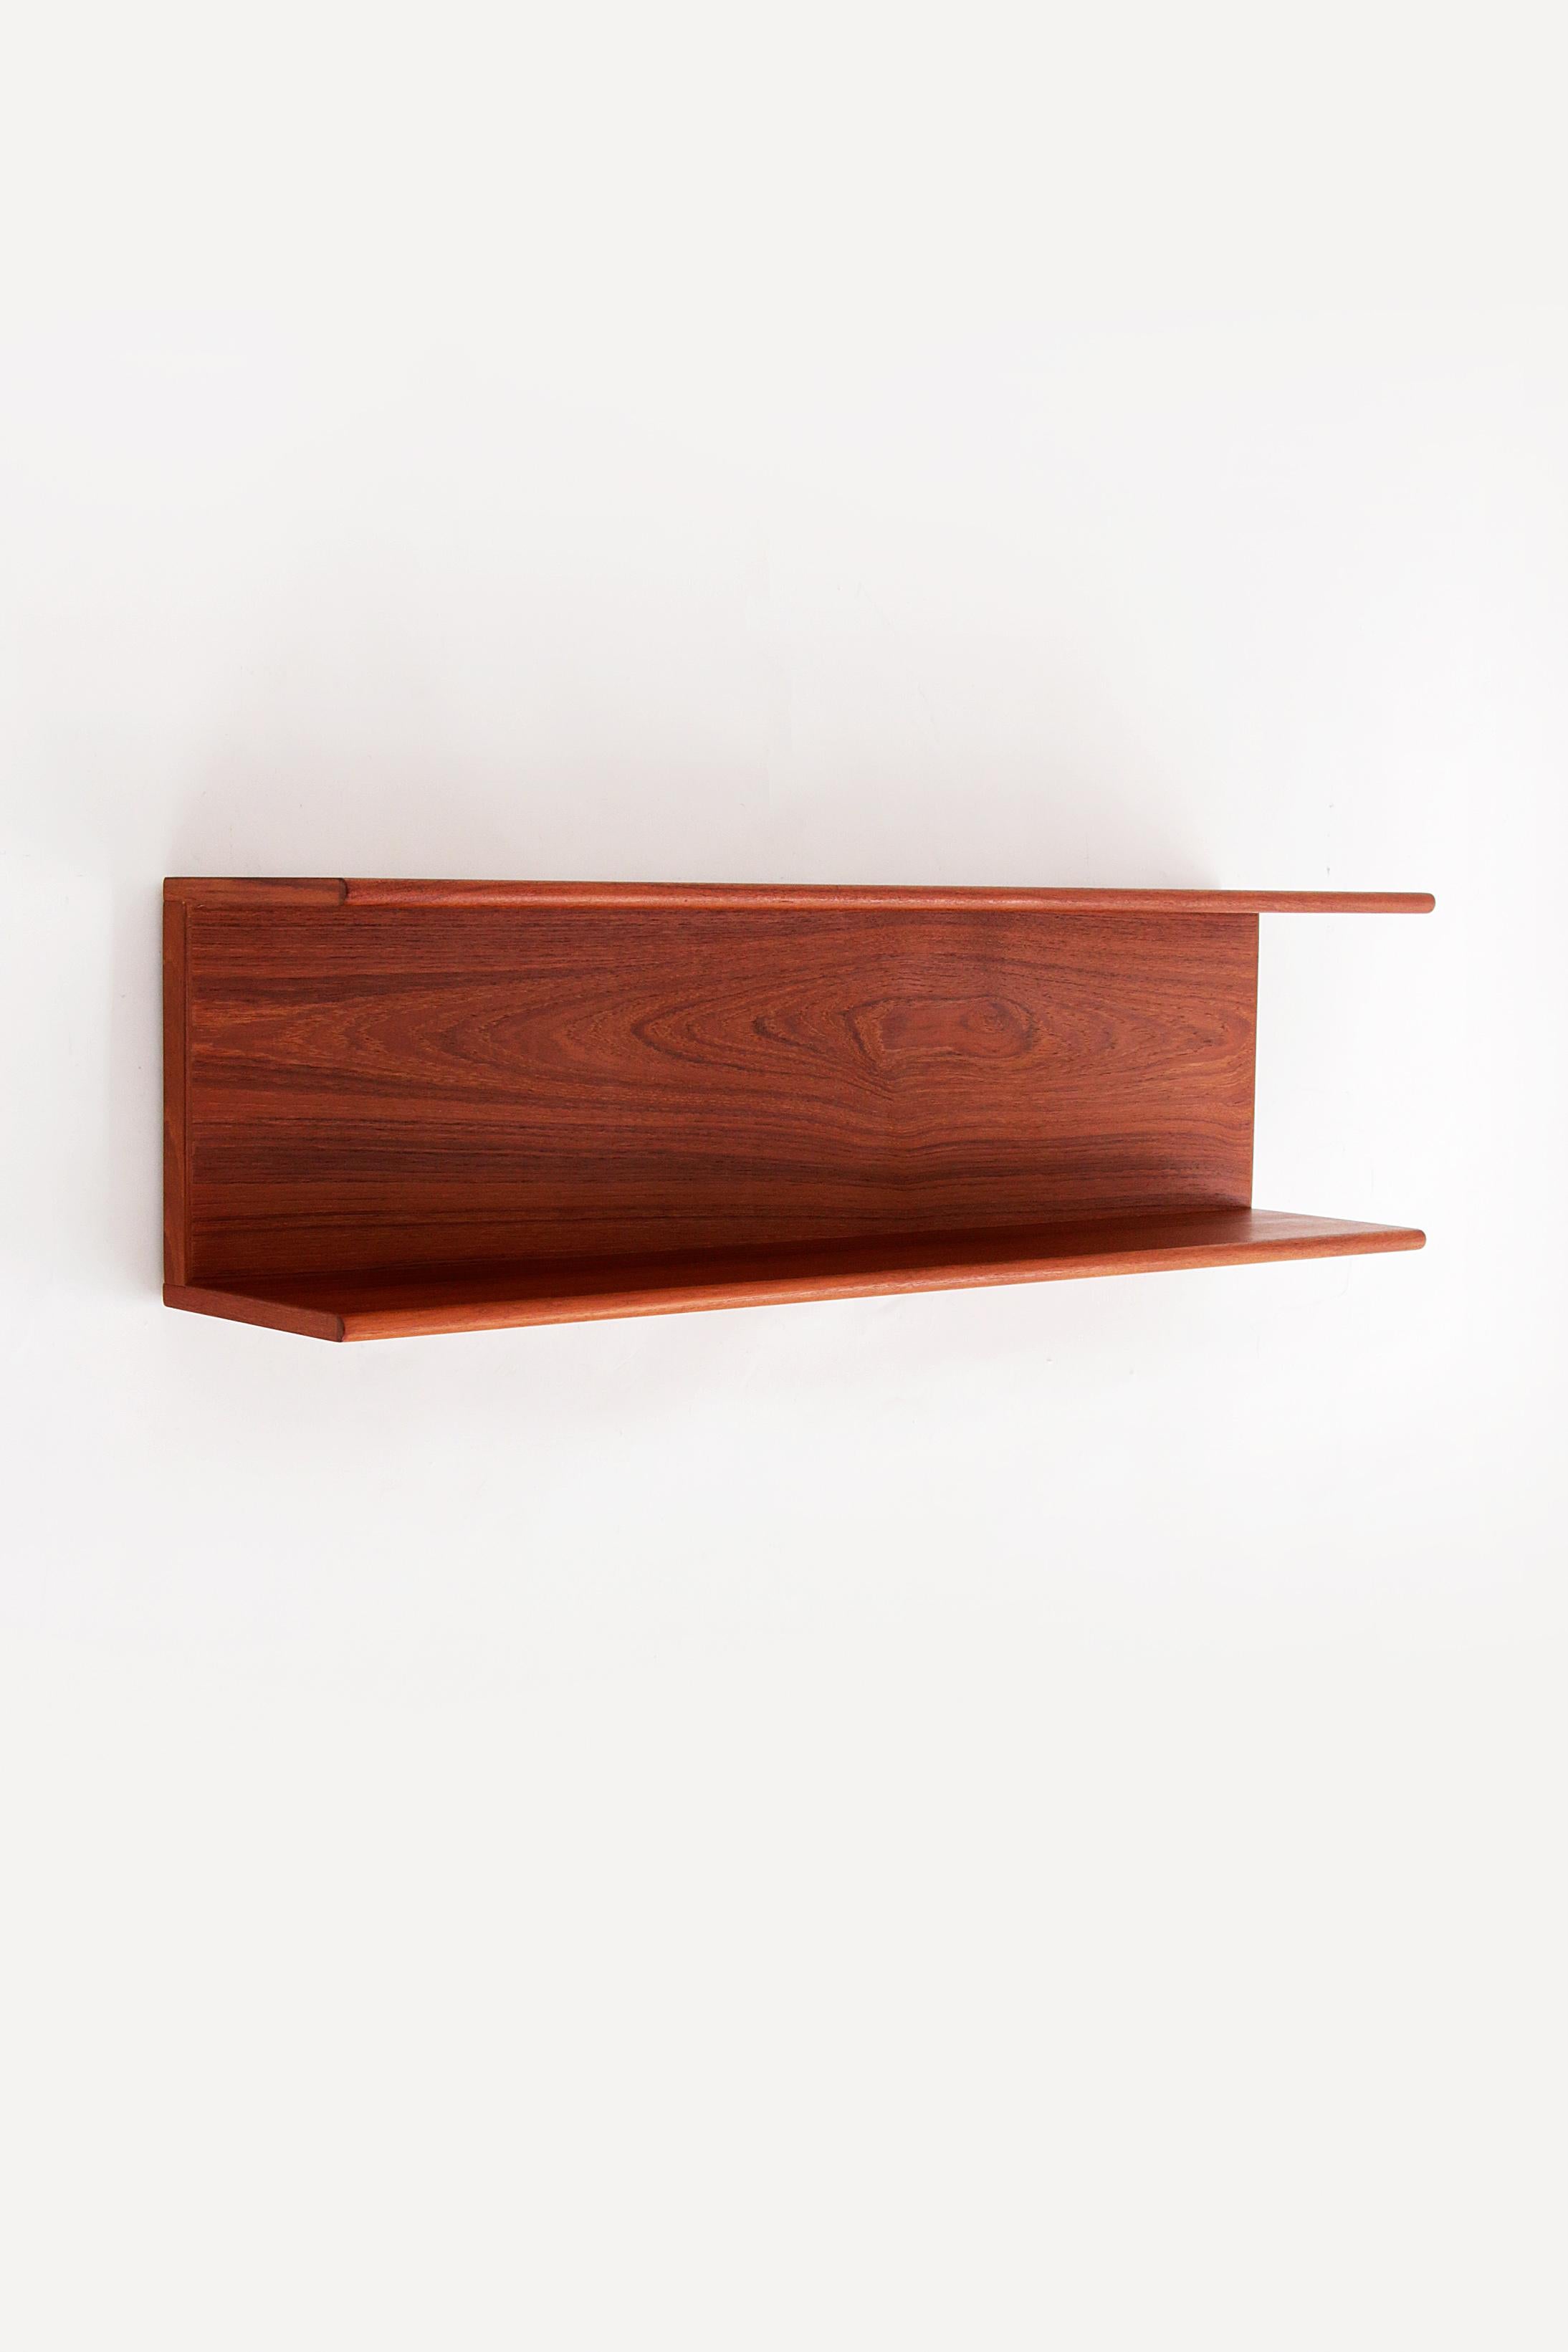 Walter Wirz Large Teak Wall Shelf - Wilhelm Renz 1960


Discover the timeless elegance of the Walter Wirz large wall shelf, an authentic piece of design history crafted by Wilhelm Renz in Germany, 1960. This U-shaped shelf, with its refined